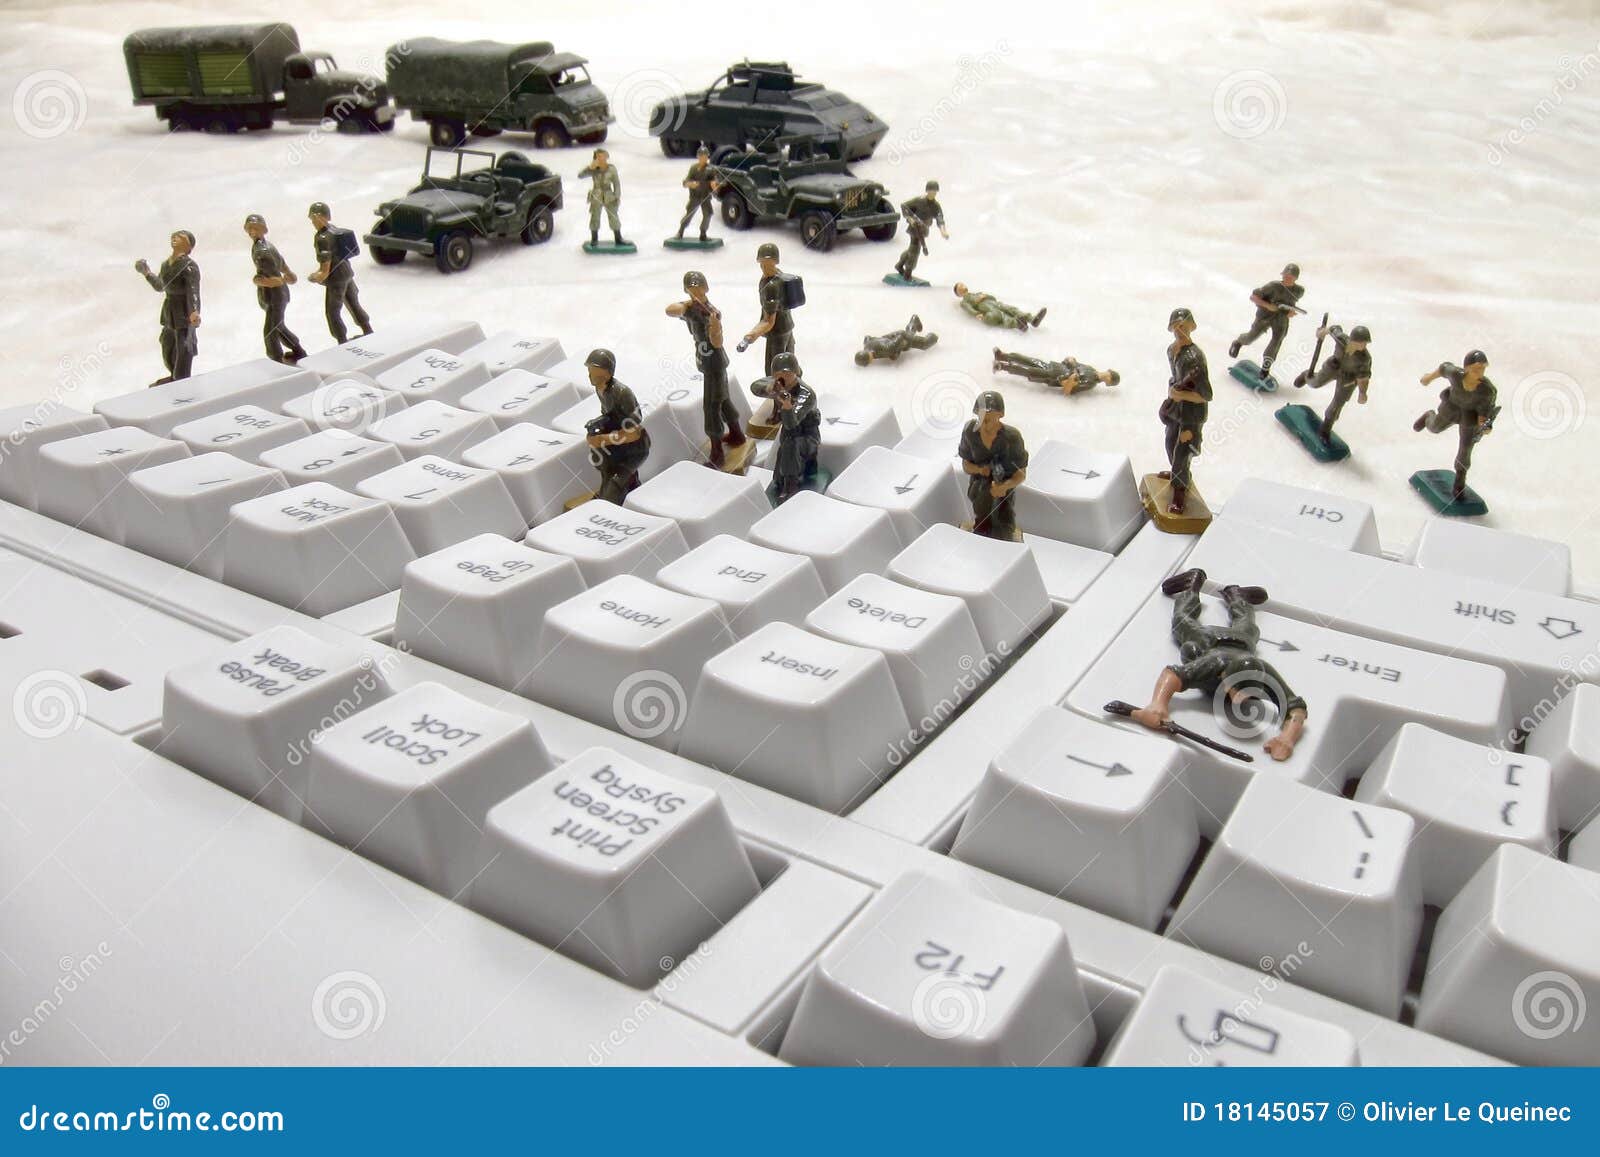 computer-security-cyber-attack-toy-soldiers-18145057.jpg